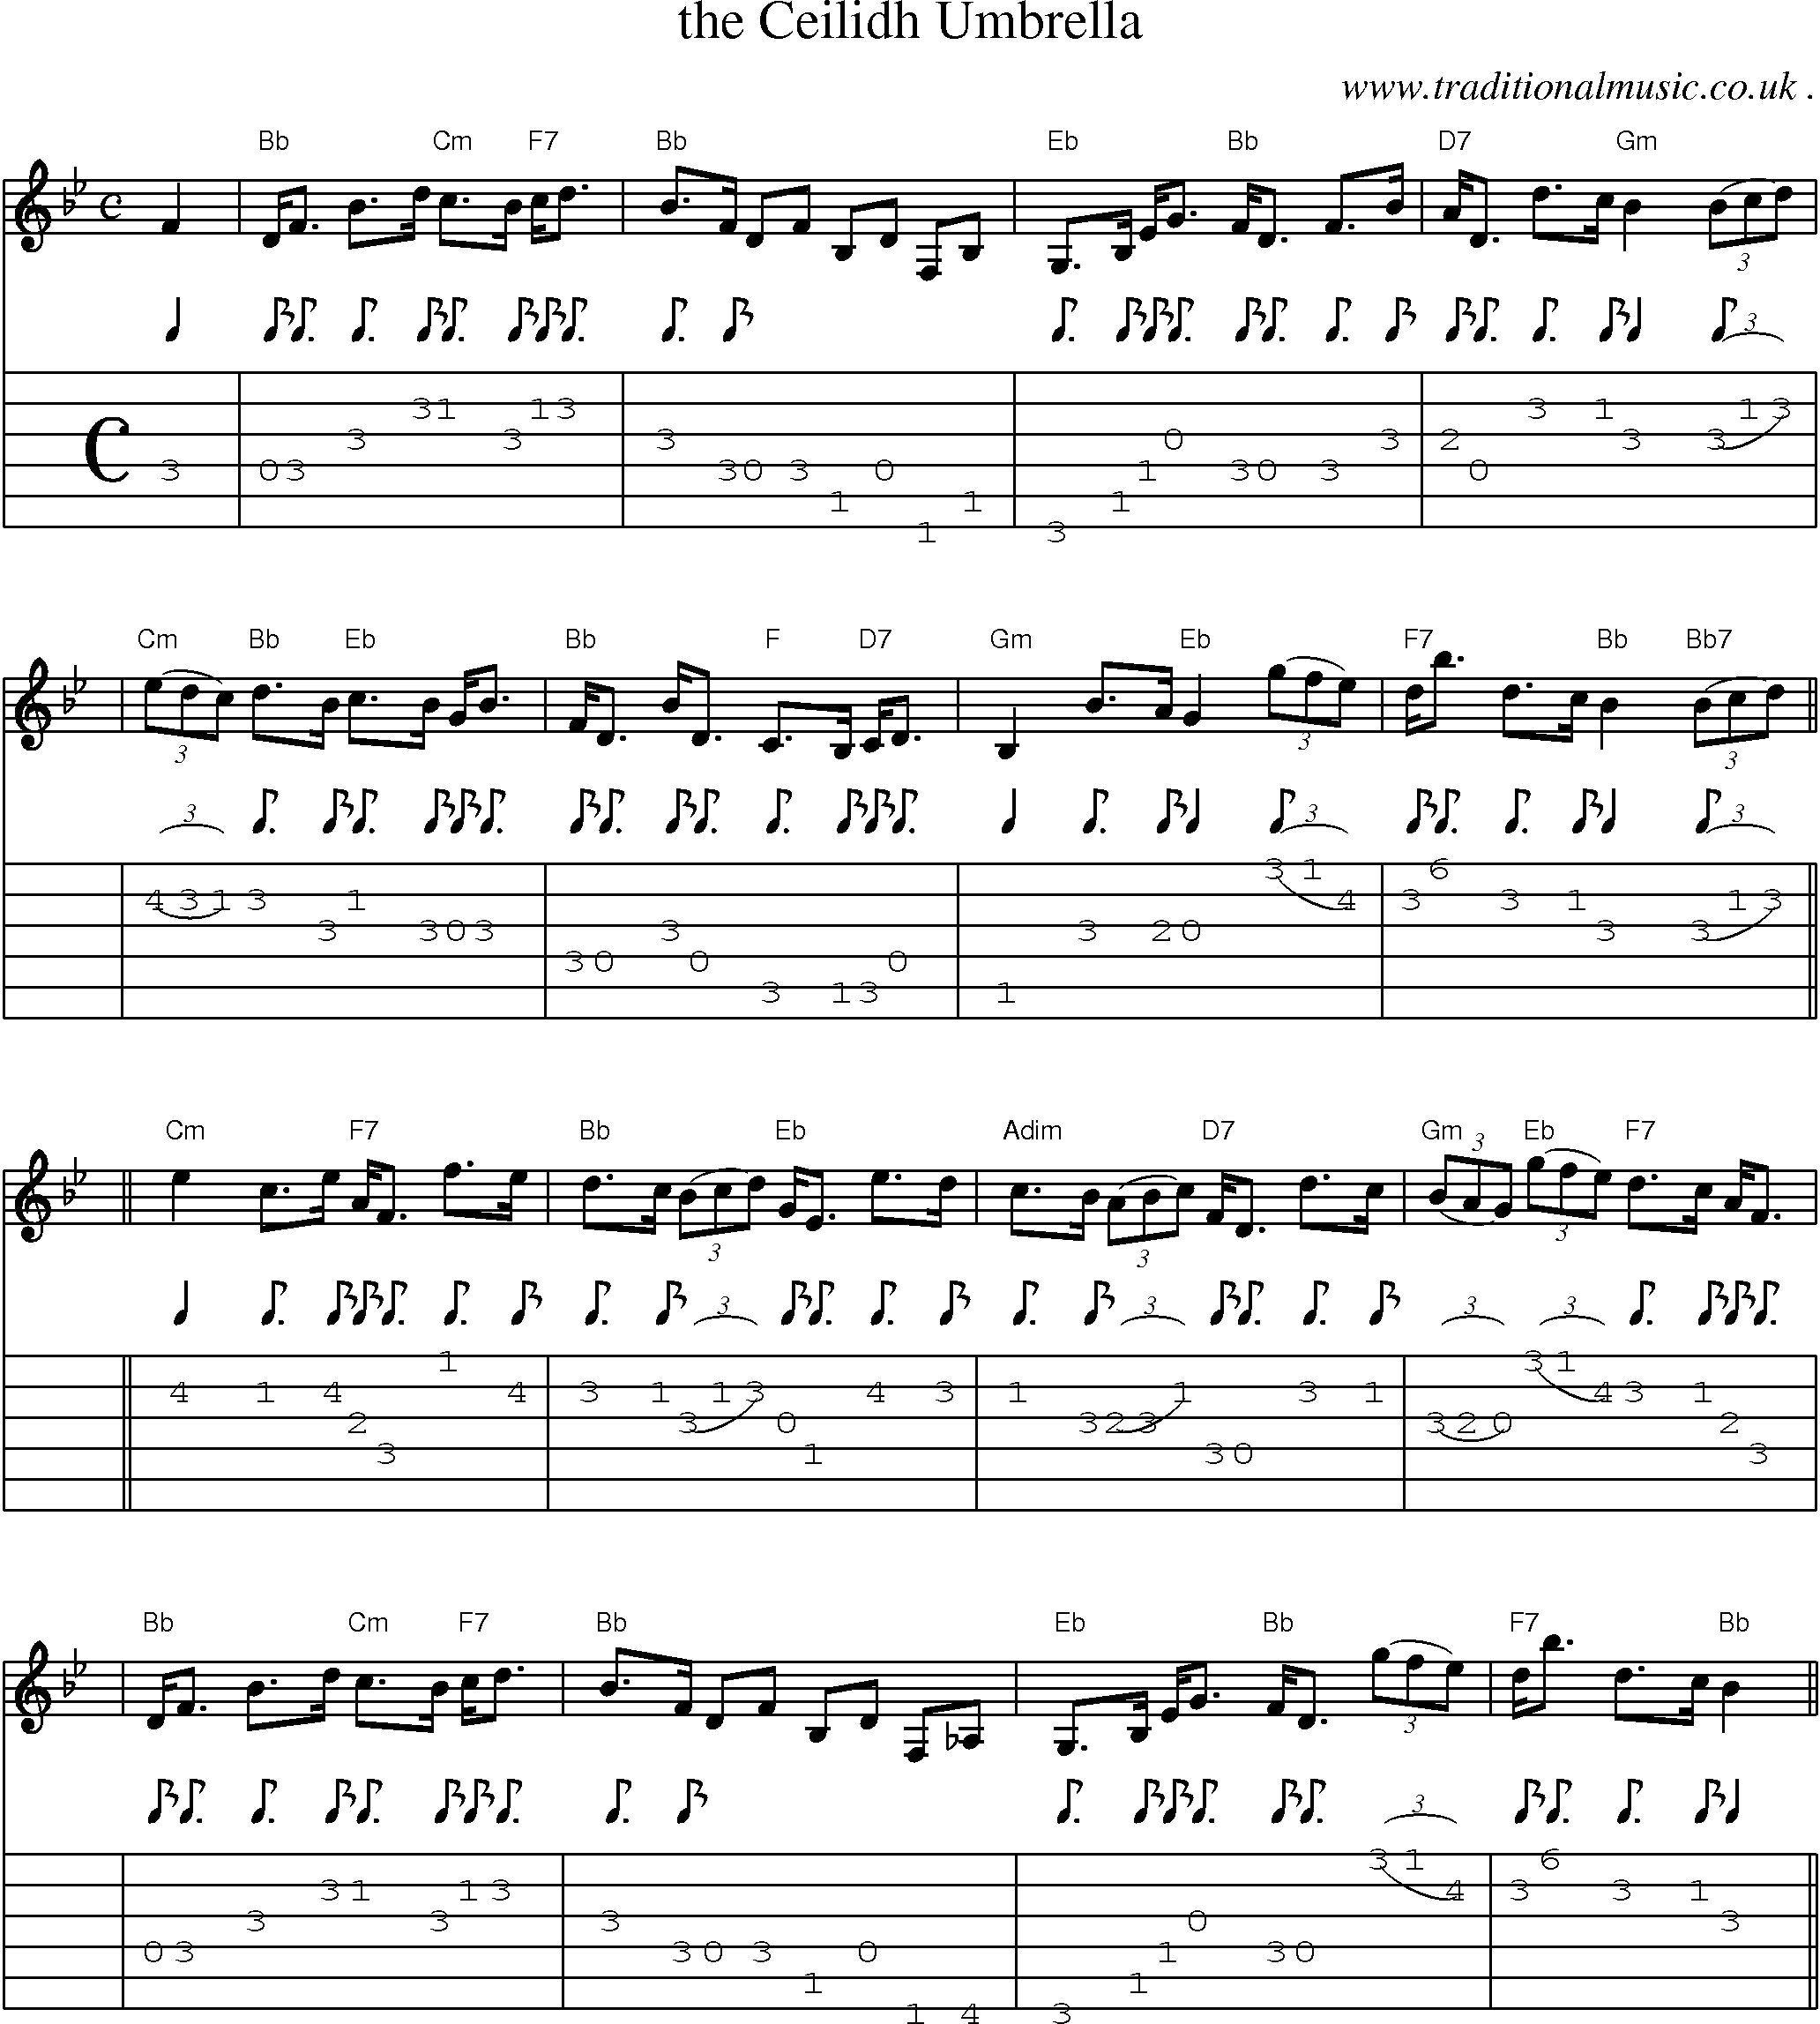 Music Score and Guitar Tabs for The Ceilidh Umbrella